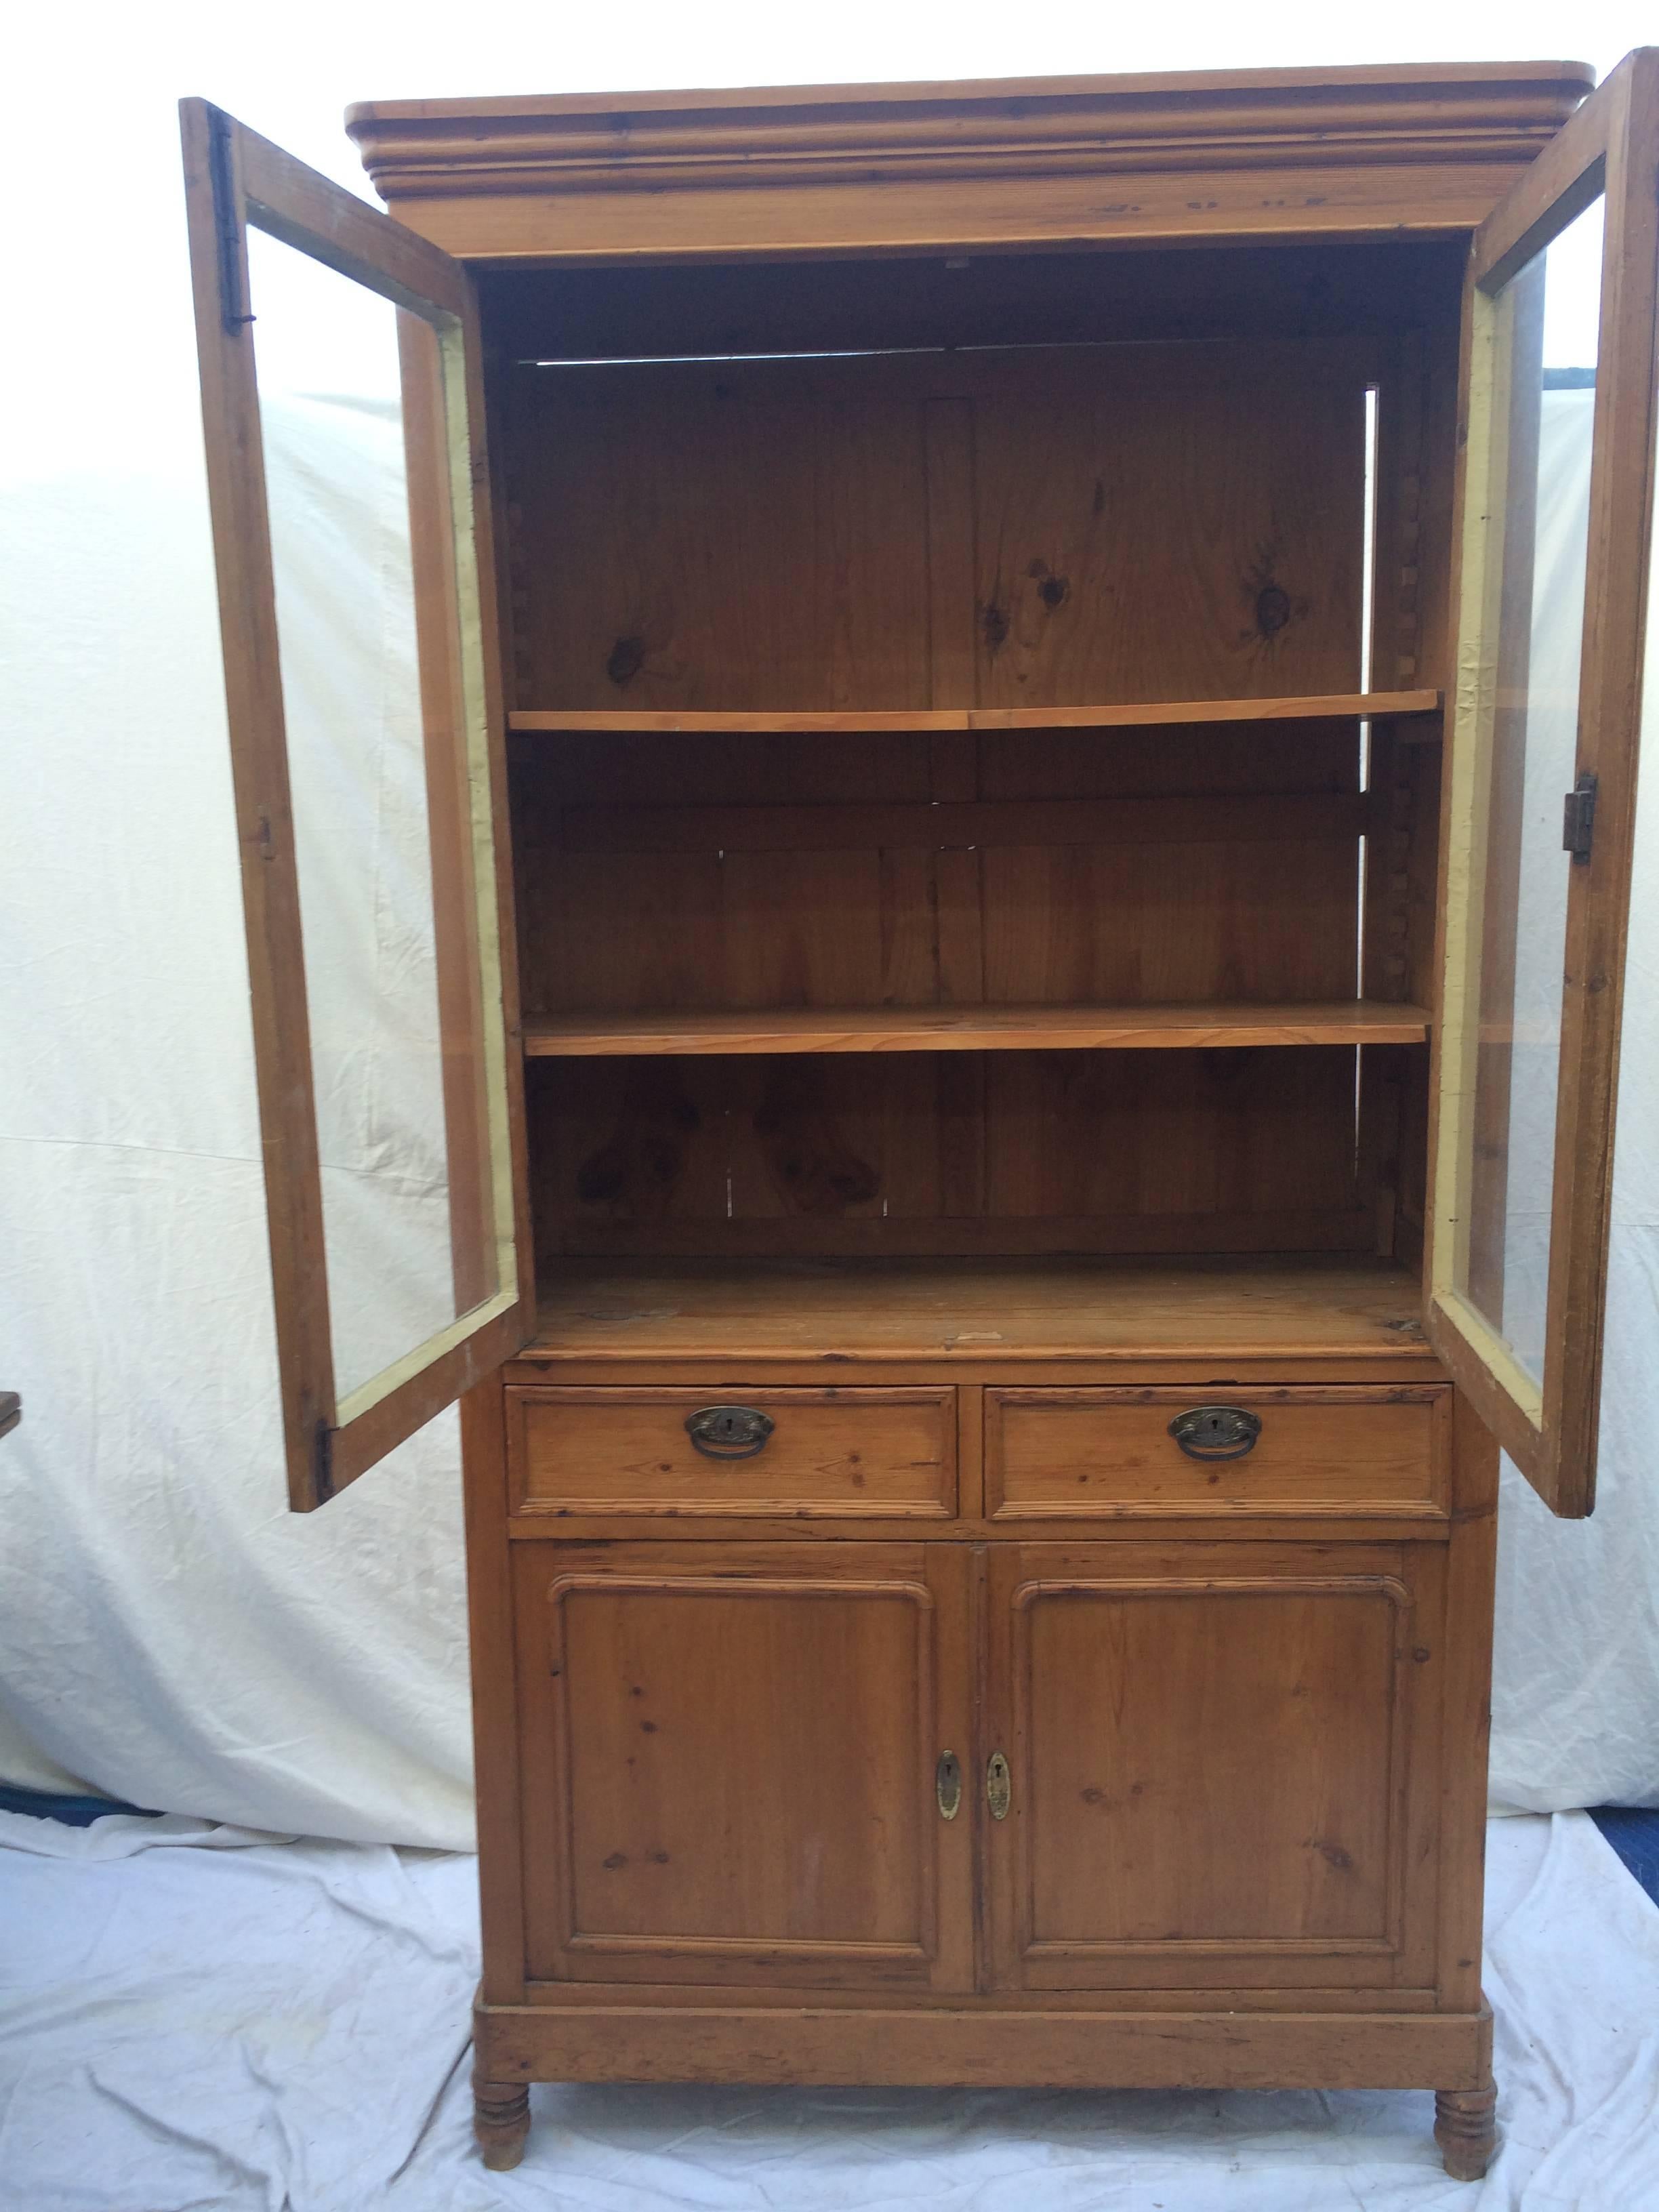 English pine cabinet with glass doors.